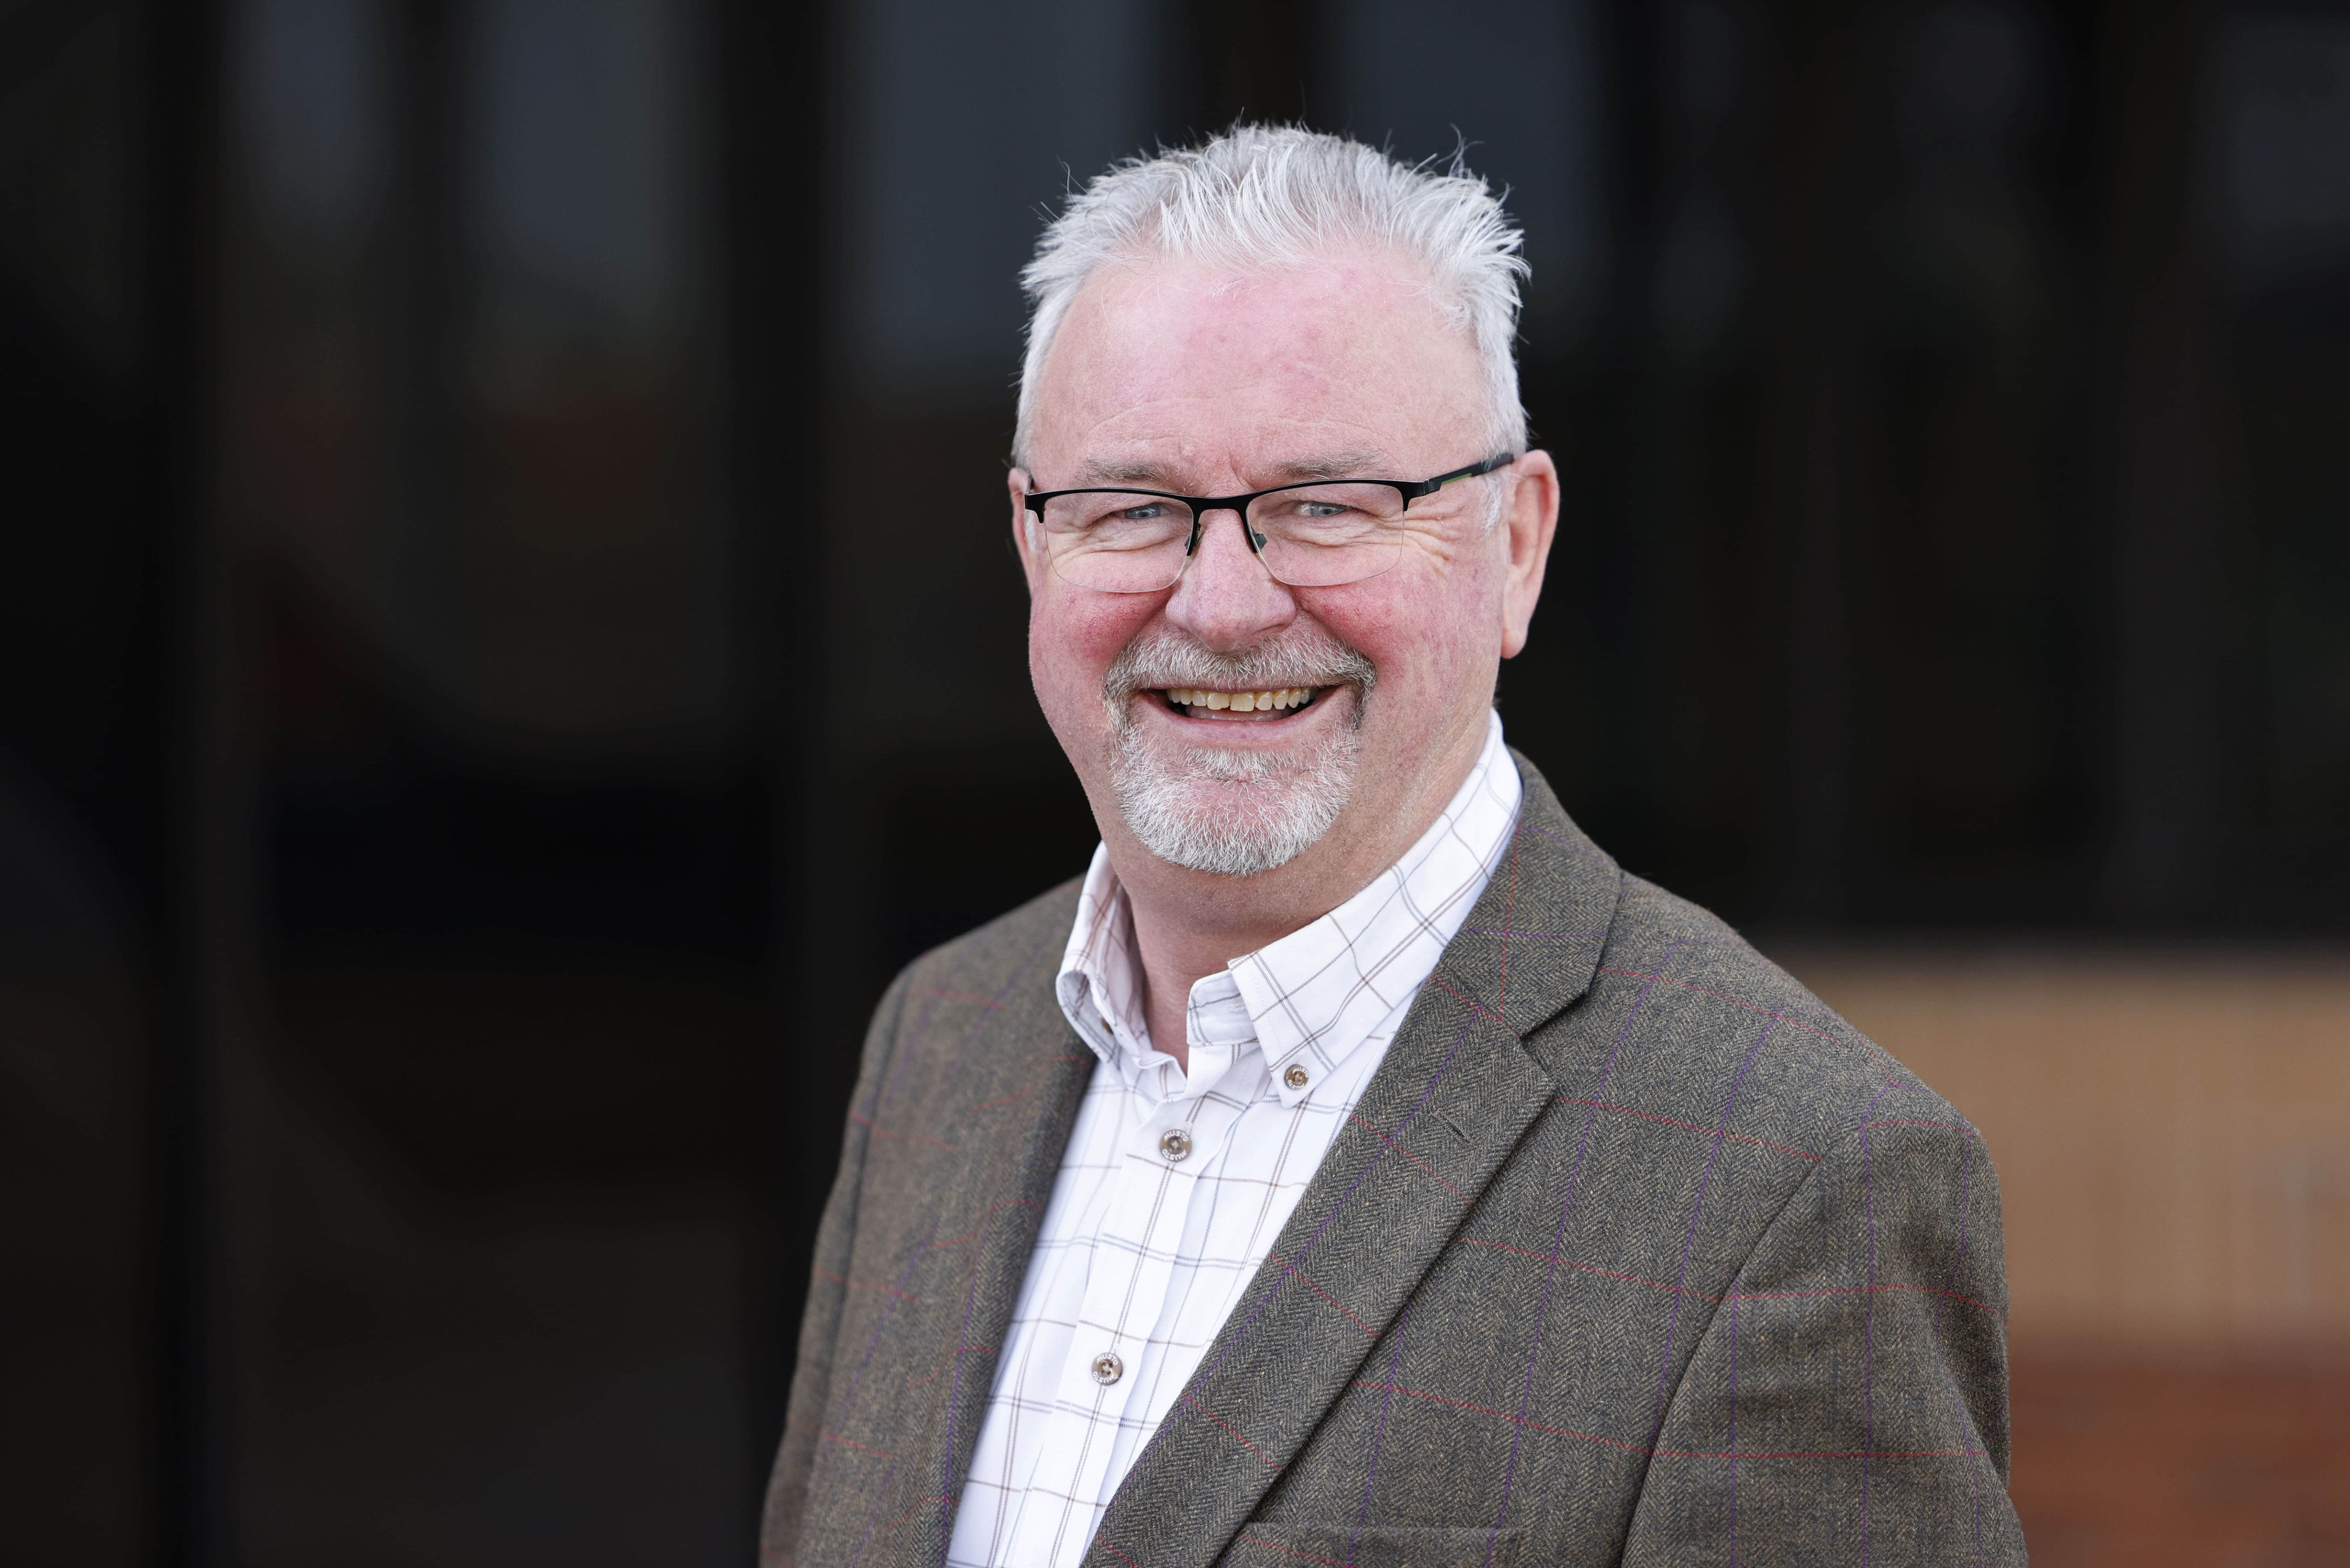 New Head of Rural Services - John Amos